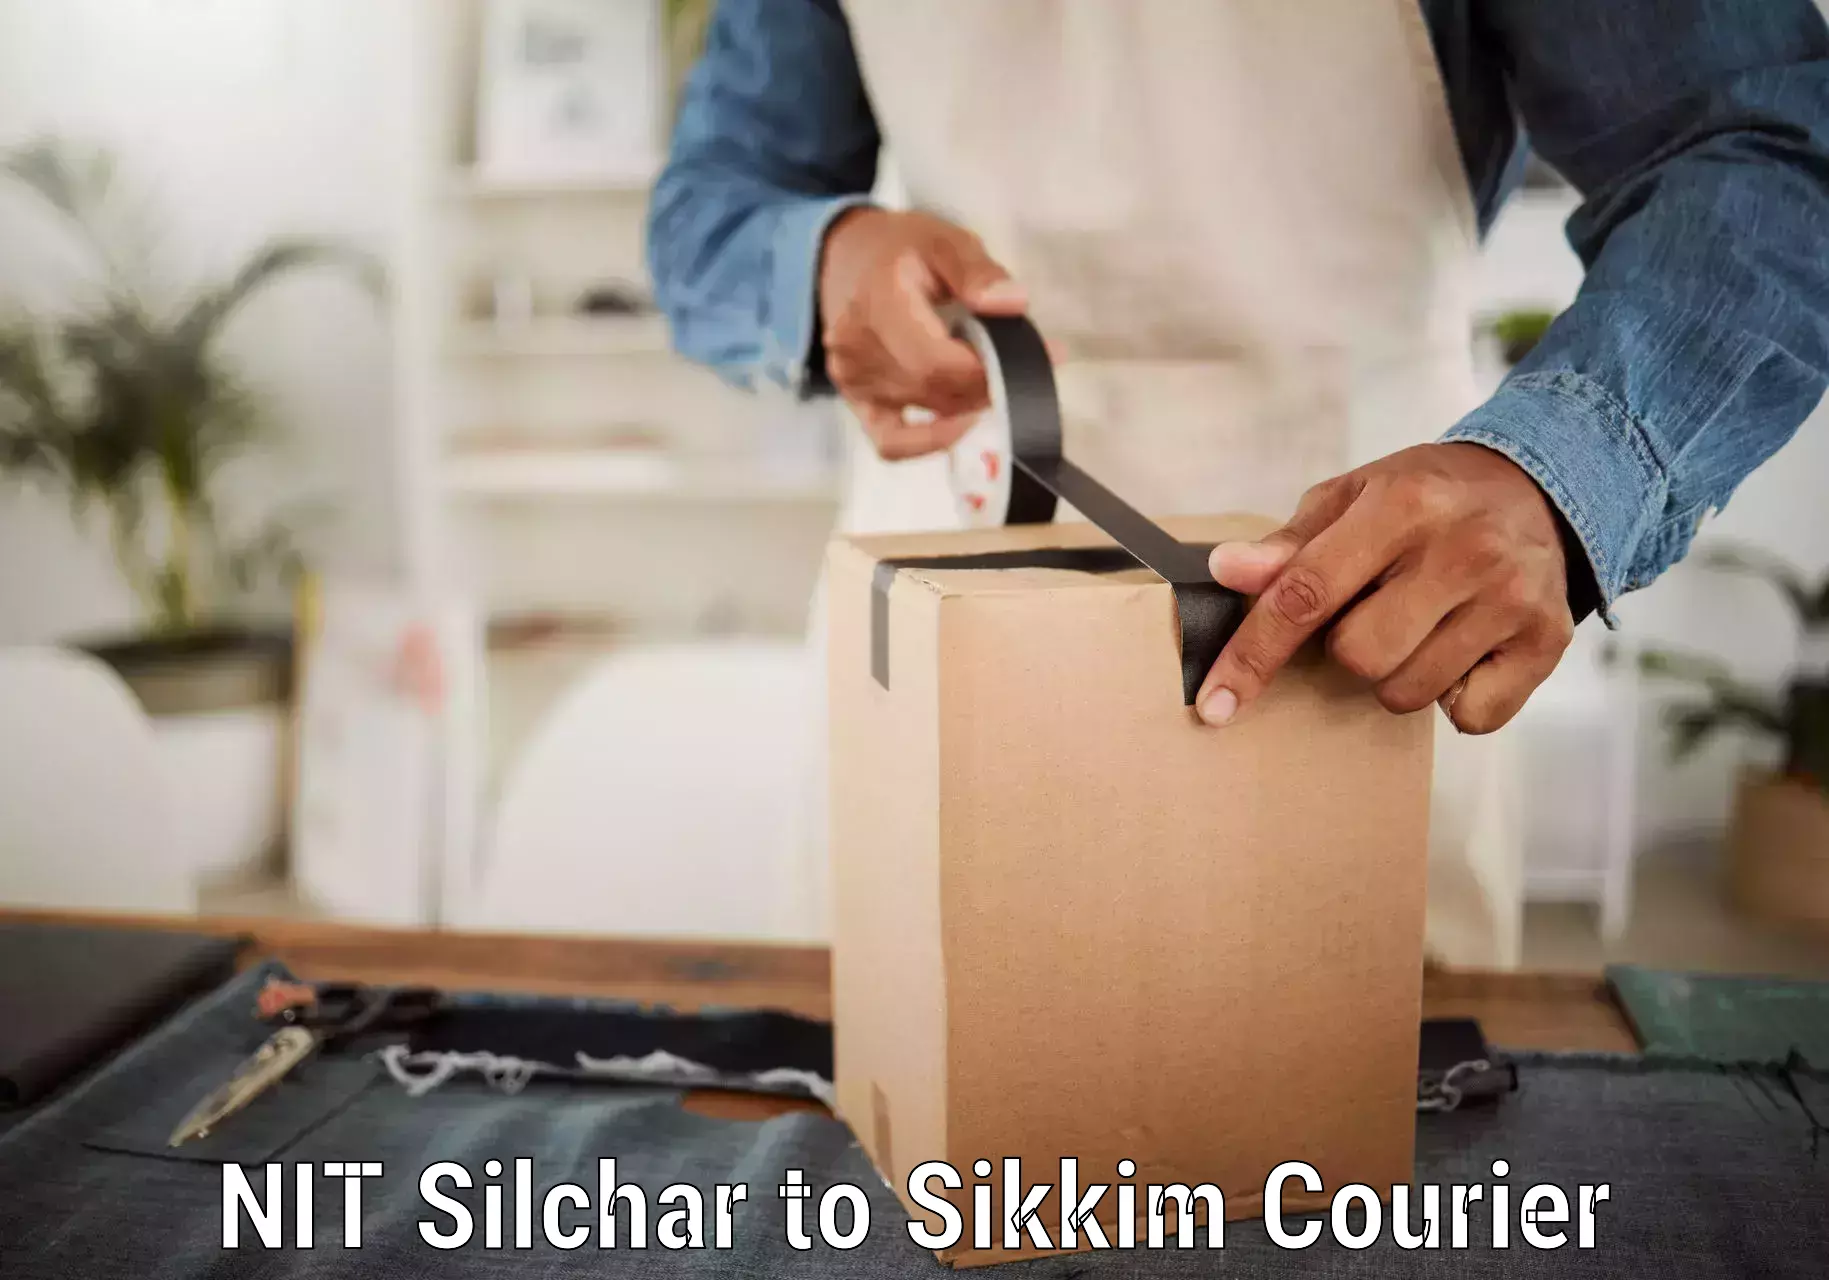 Courier service partnerships NIT Silchar to Pelling